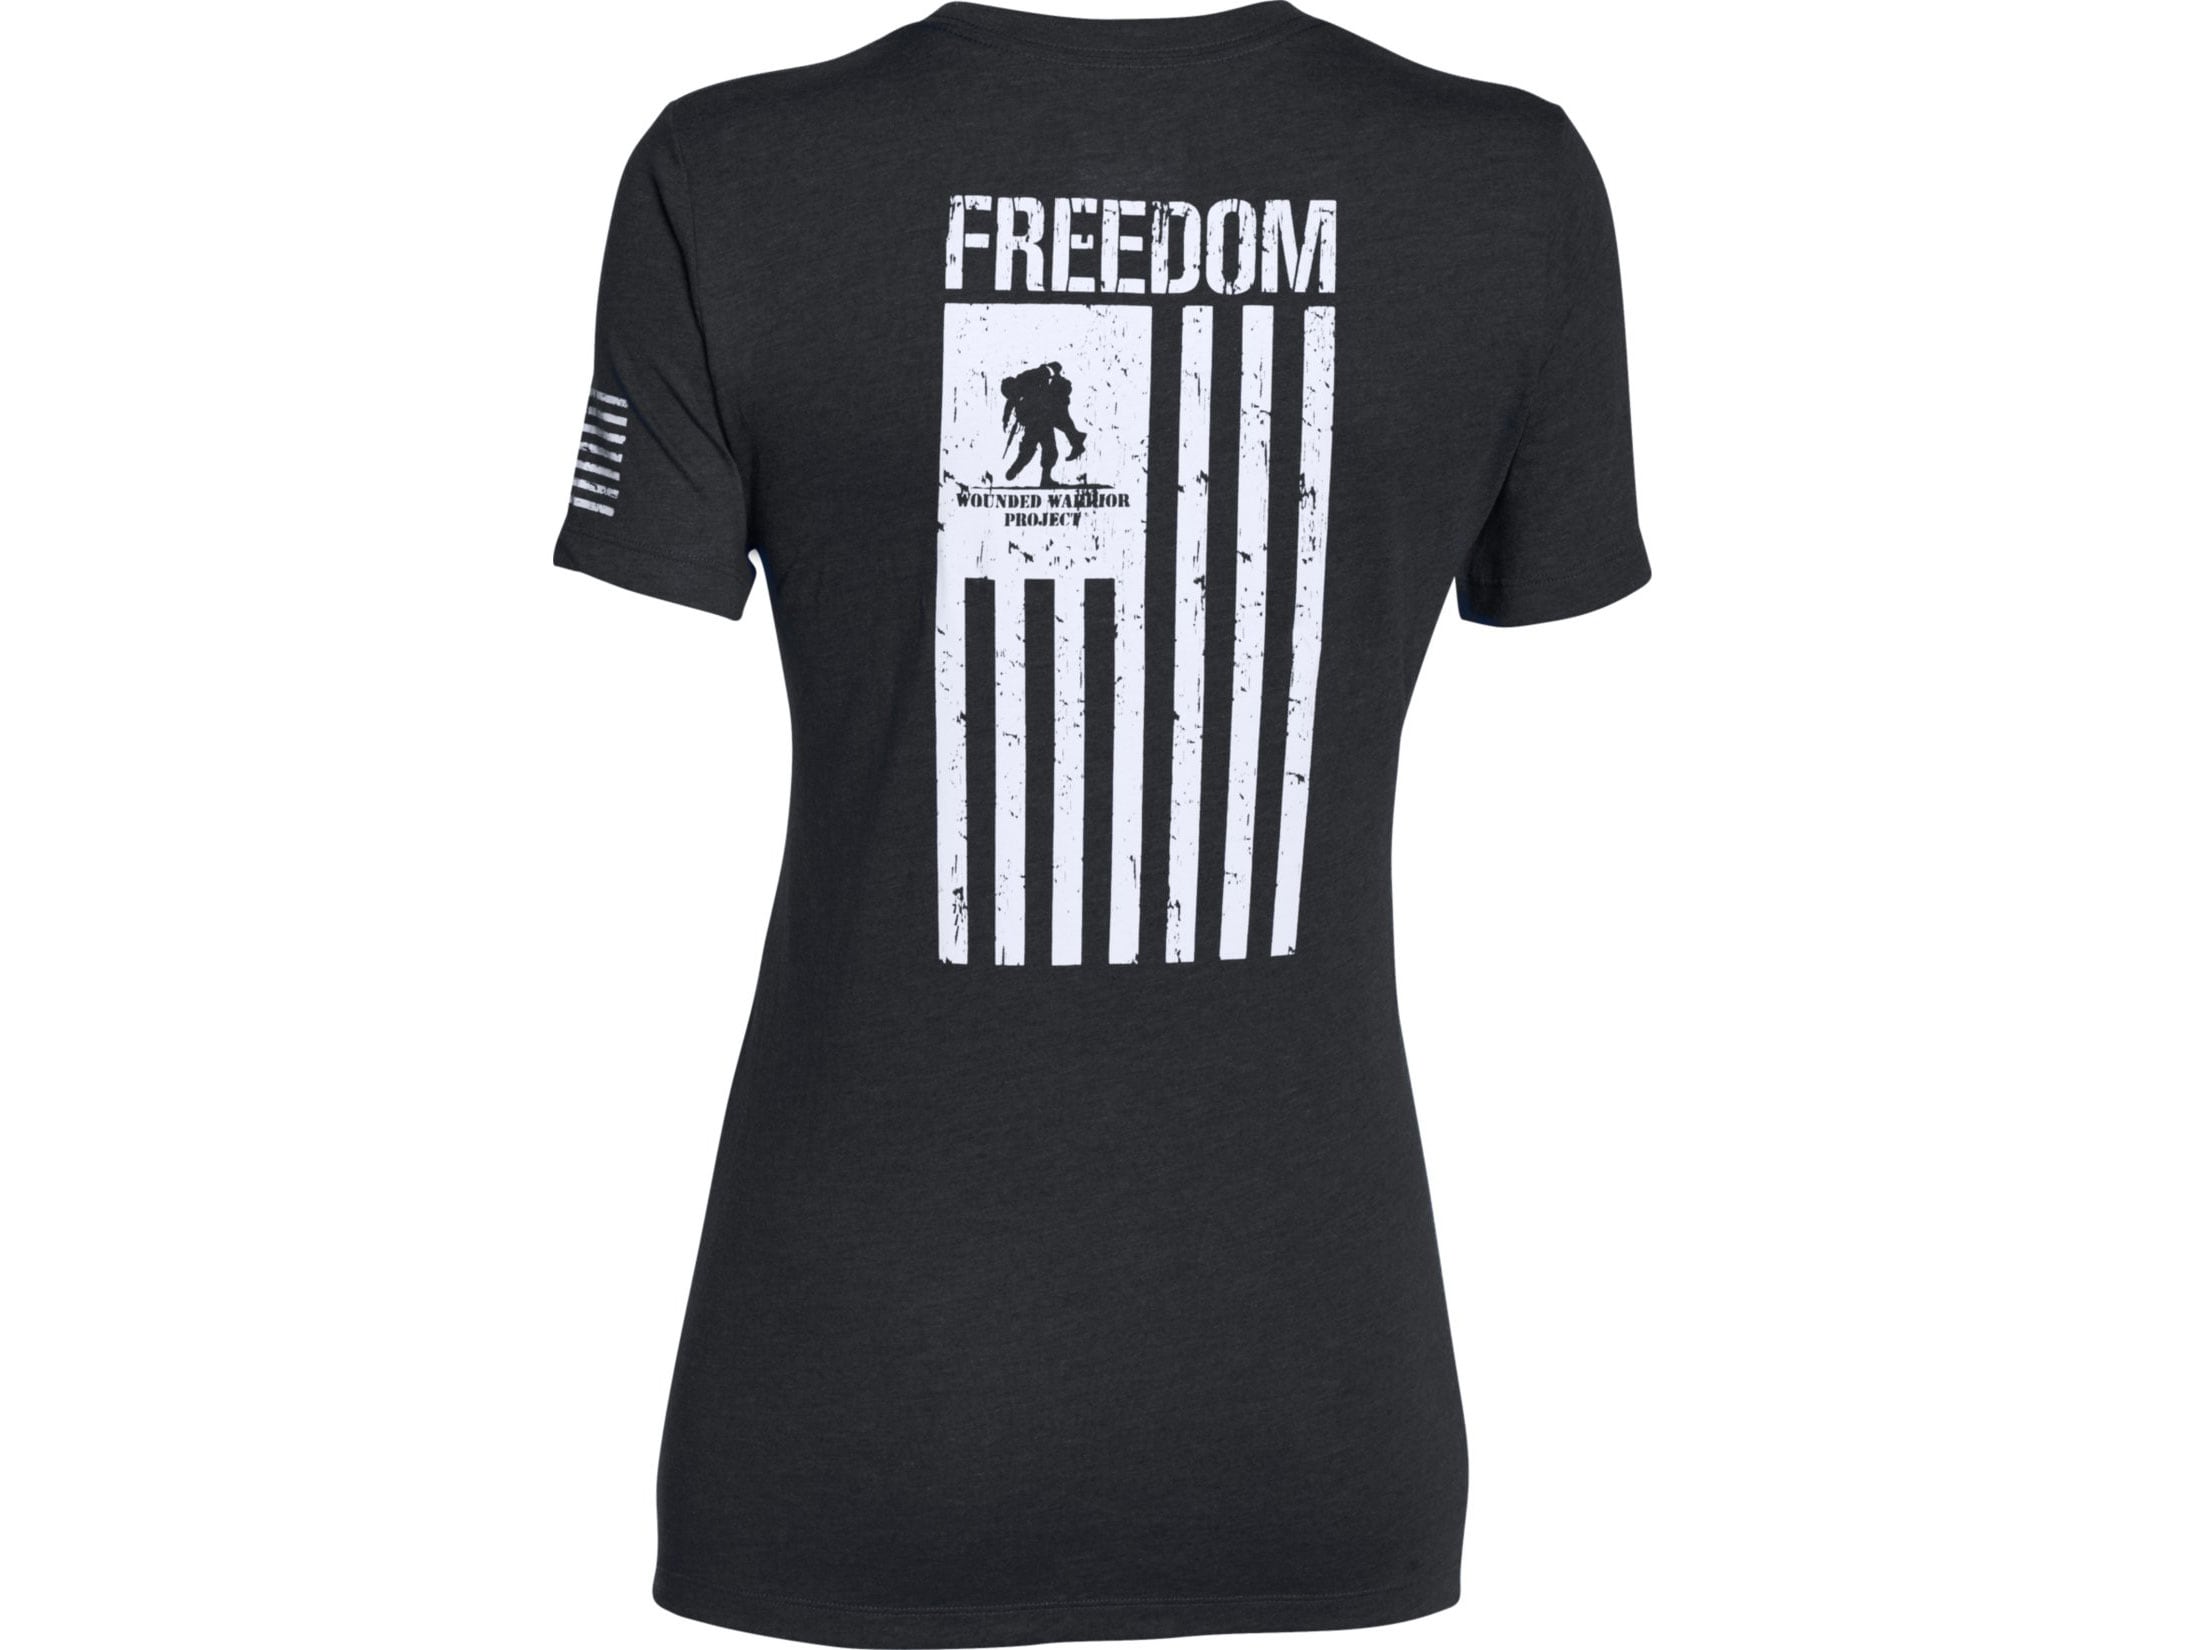 wounded warrior project freedom flag shirt